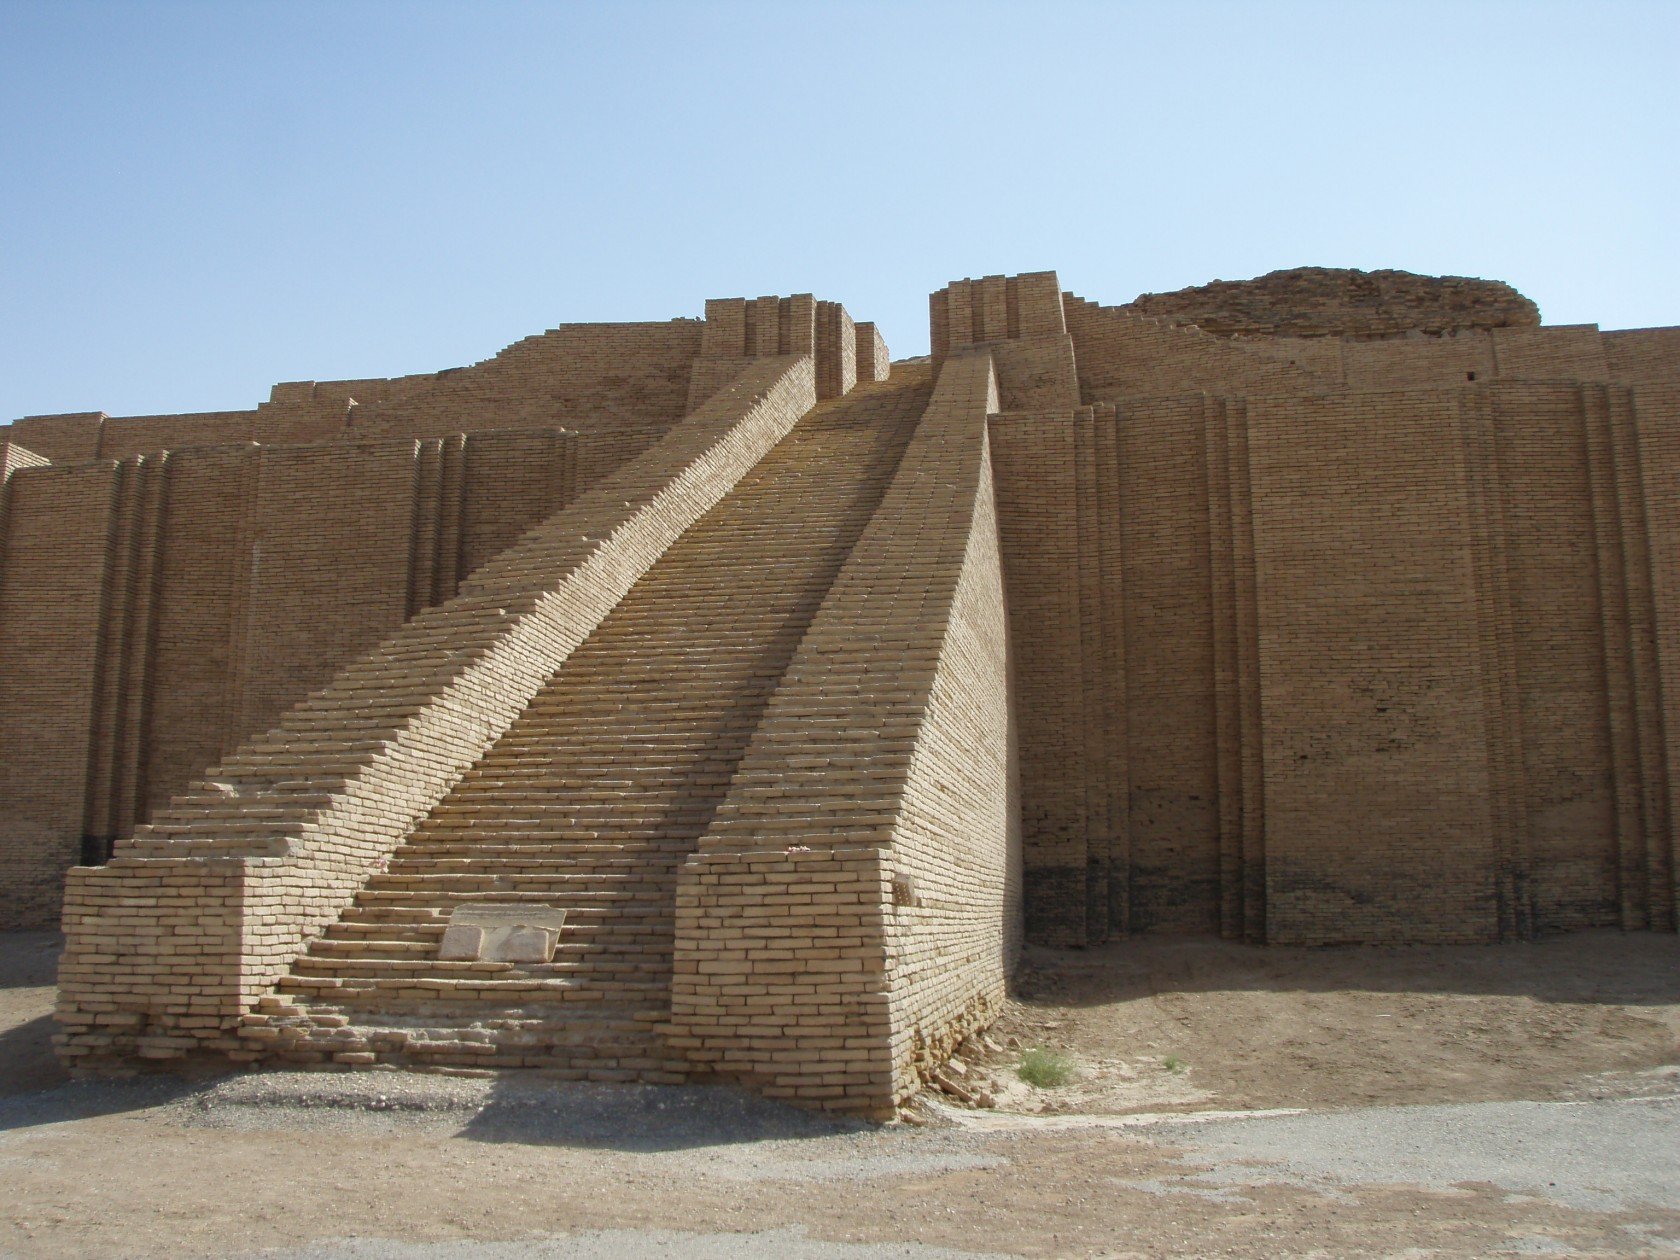 The Architectural Heritage of the Mesopotamian Civilization